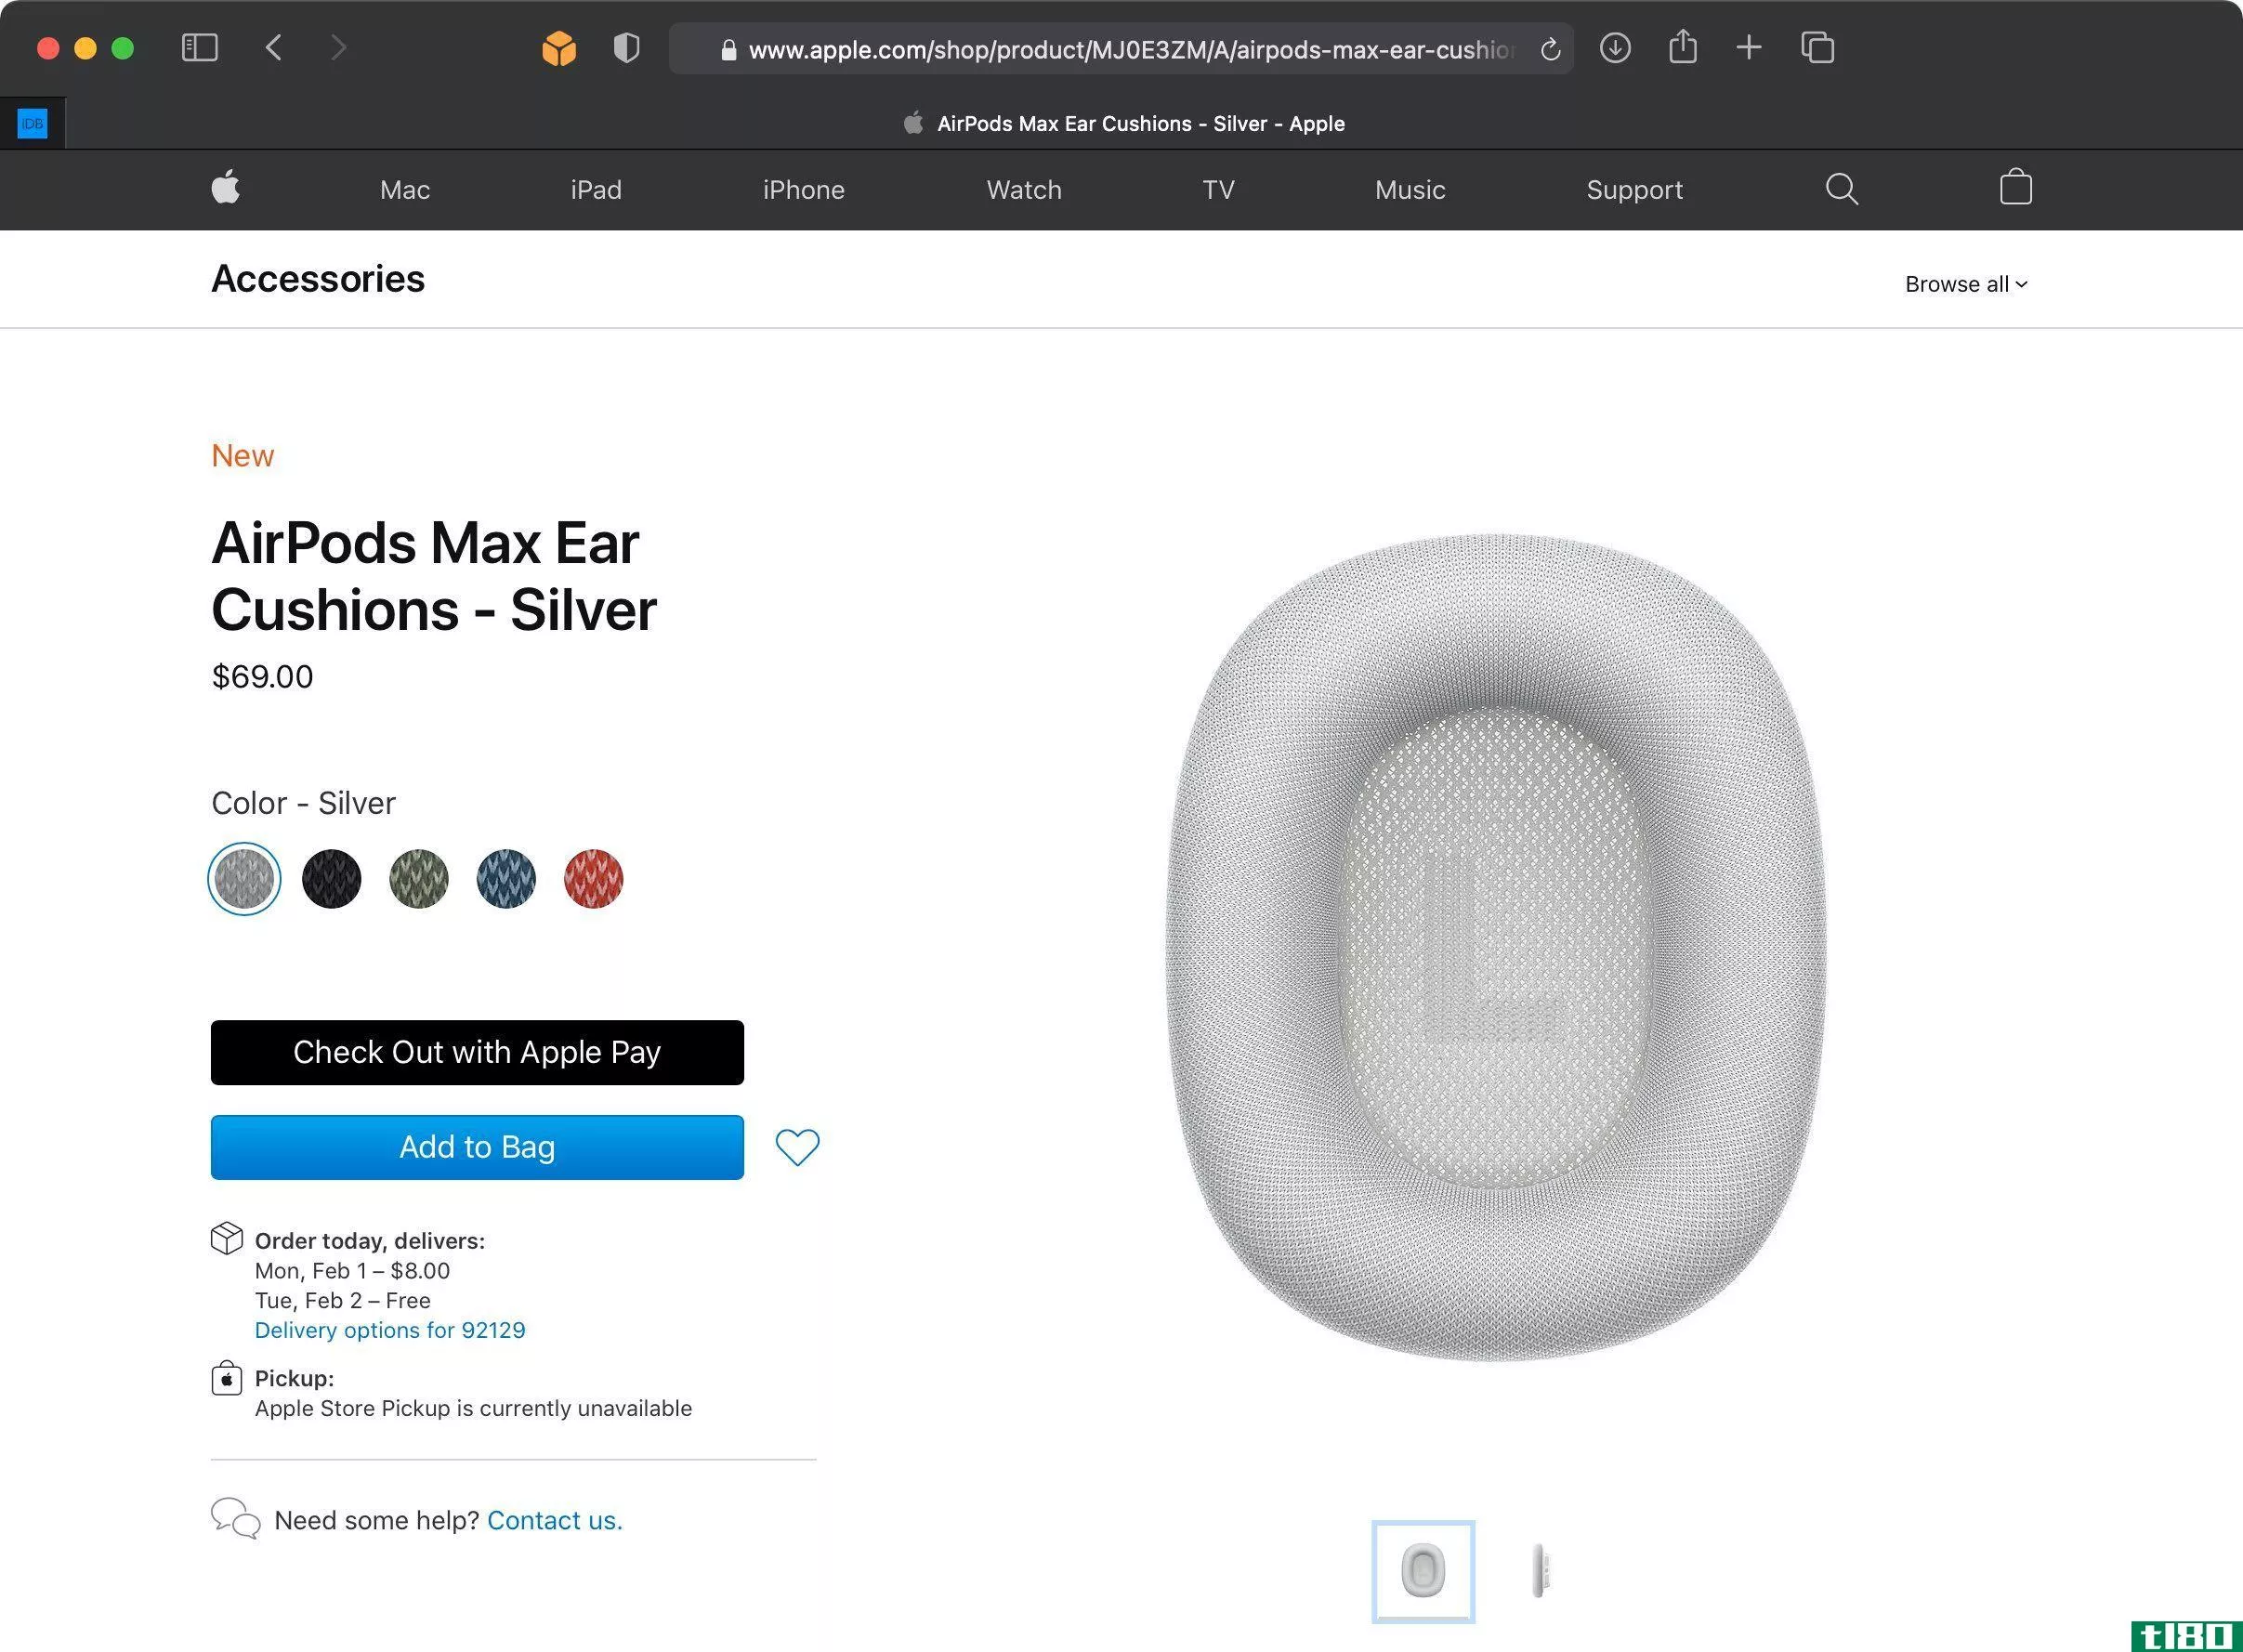 A screenshot of the Apple online store showing the listing for the AirPods Max replacement ear cushi***, priced at $69 per pair